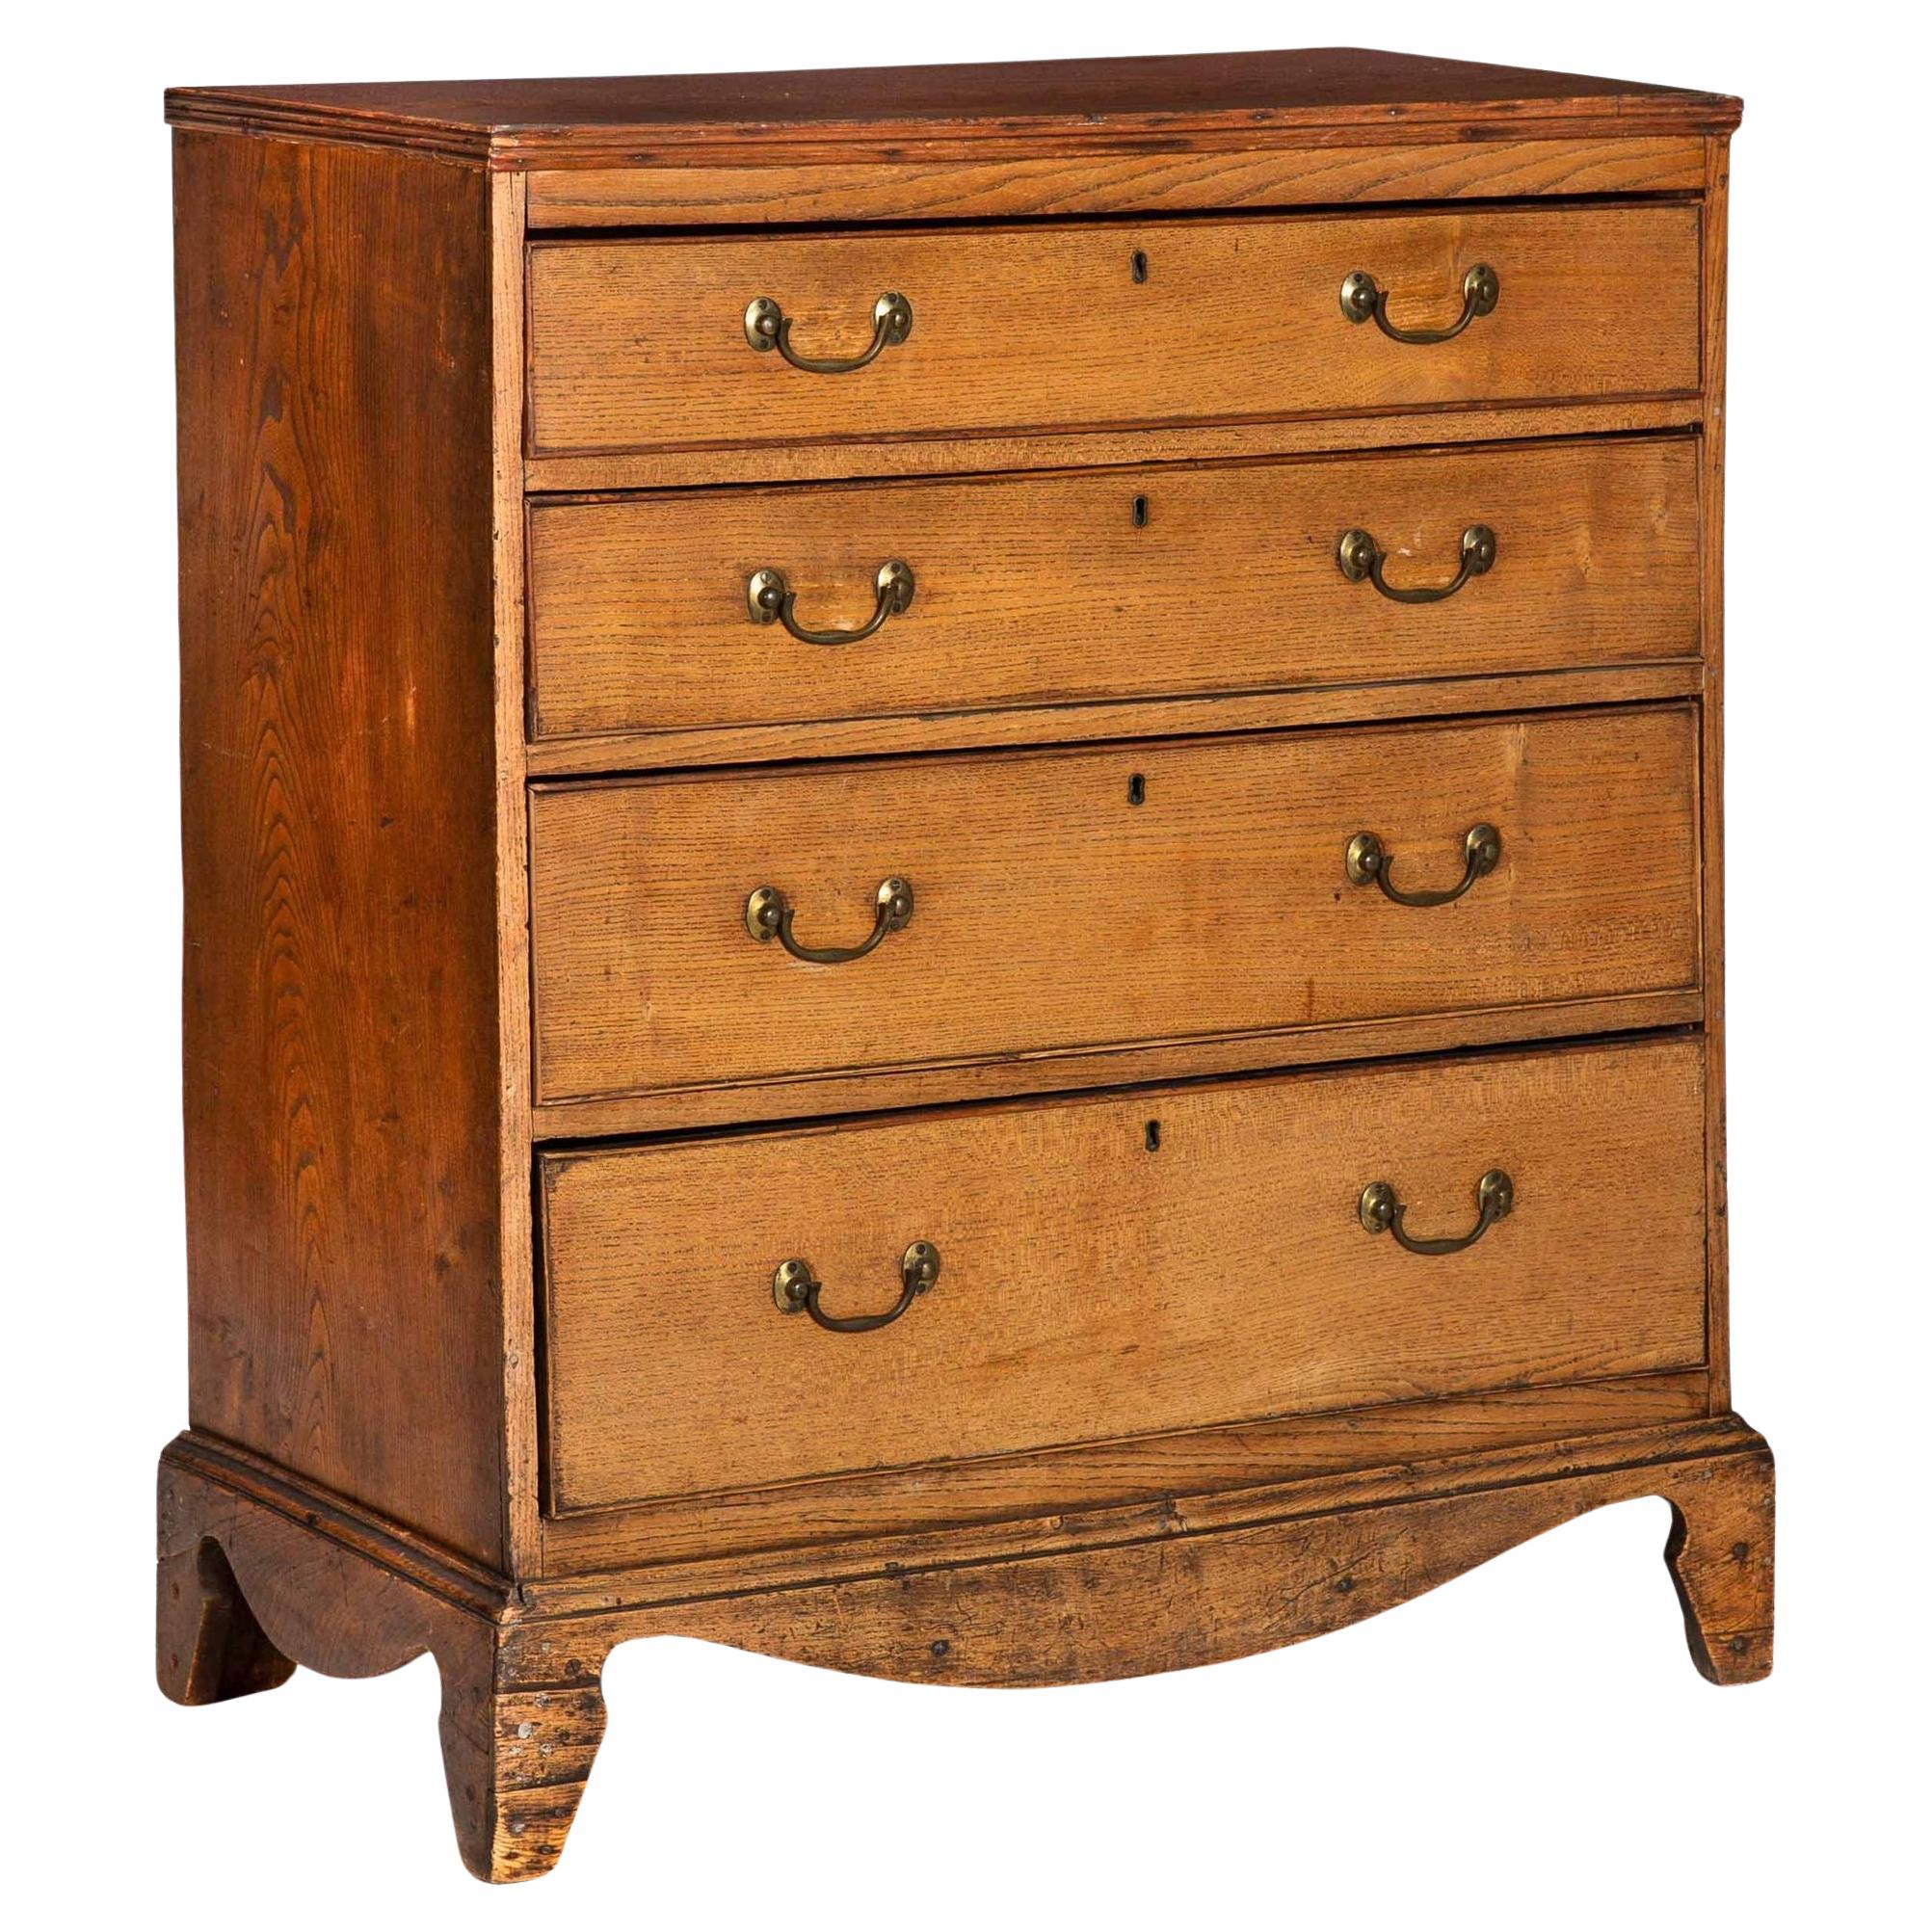 English Antique Patinated Worn Elm Chest of Drawers, Early 19th Century